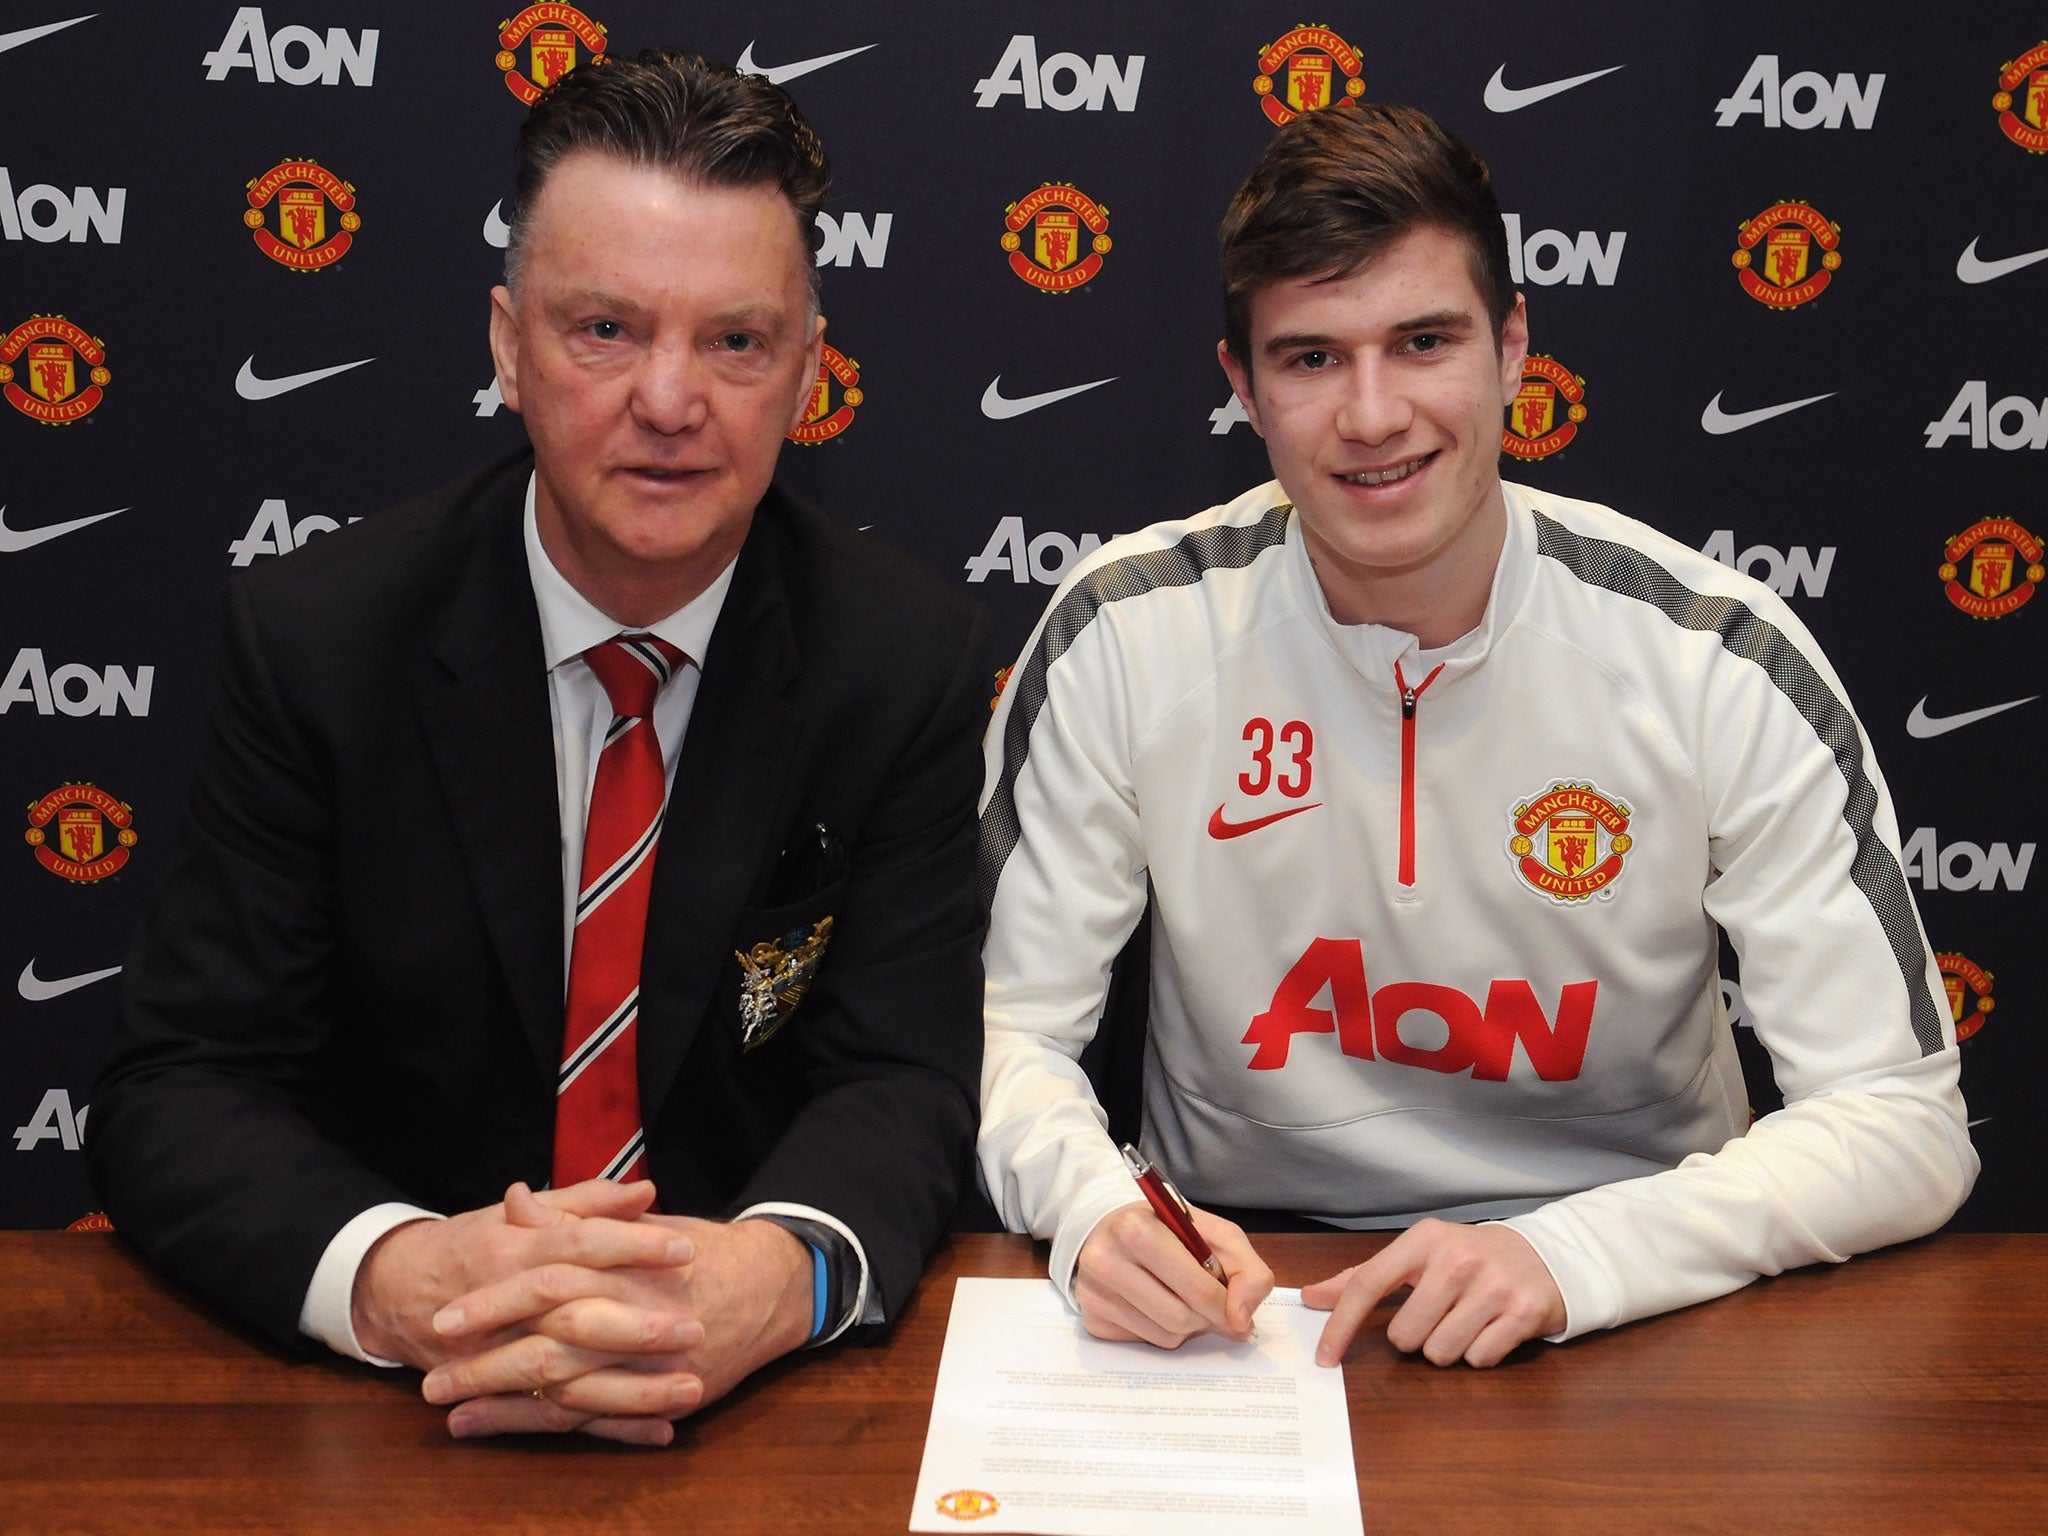 Paddy McNair has signed a new contract with Manchester United until 2017